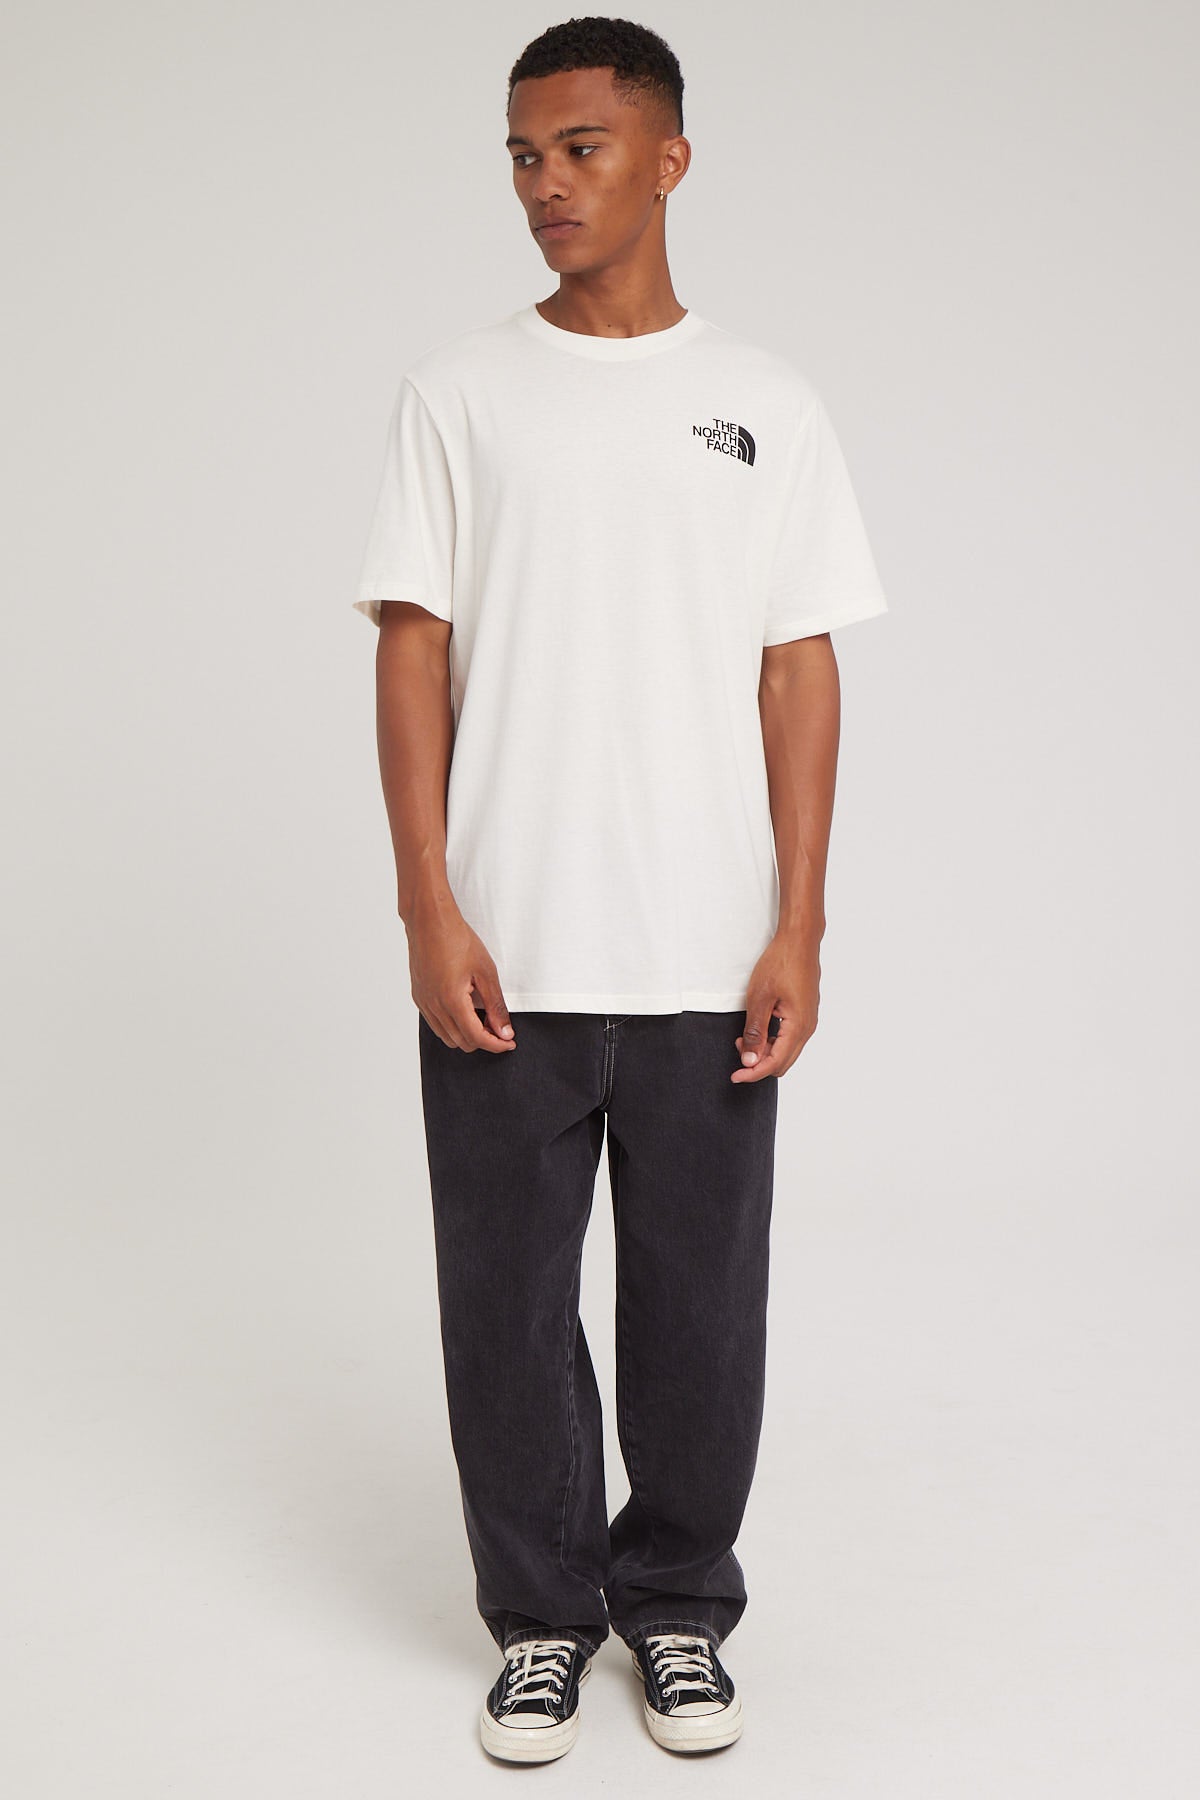 The North Face Men's S/S Box NSE Tee Gardenia White/Photo Real Graphics